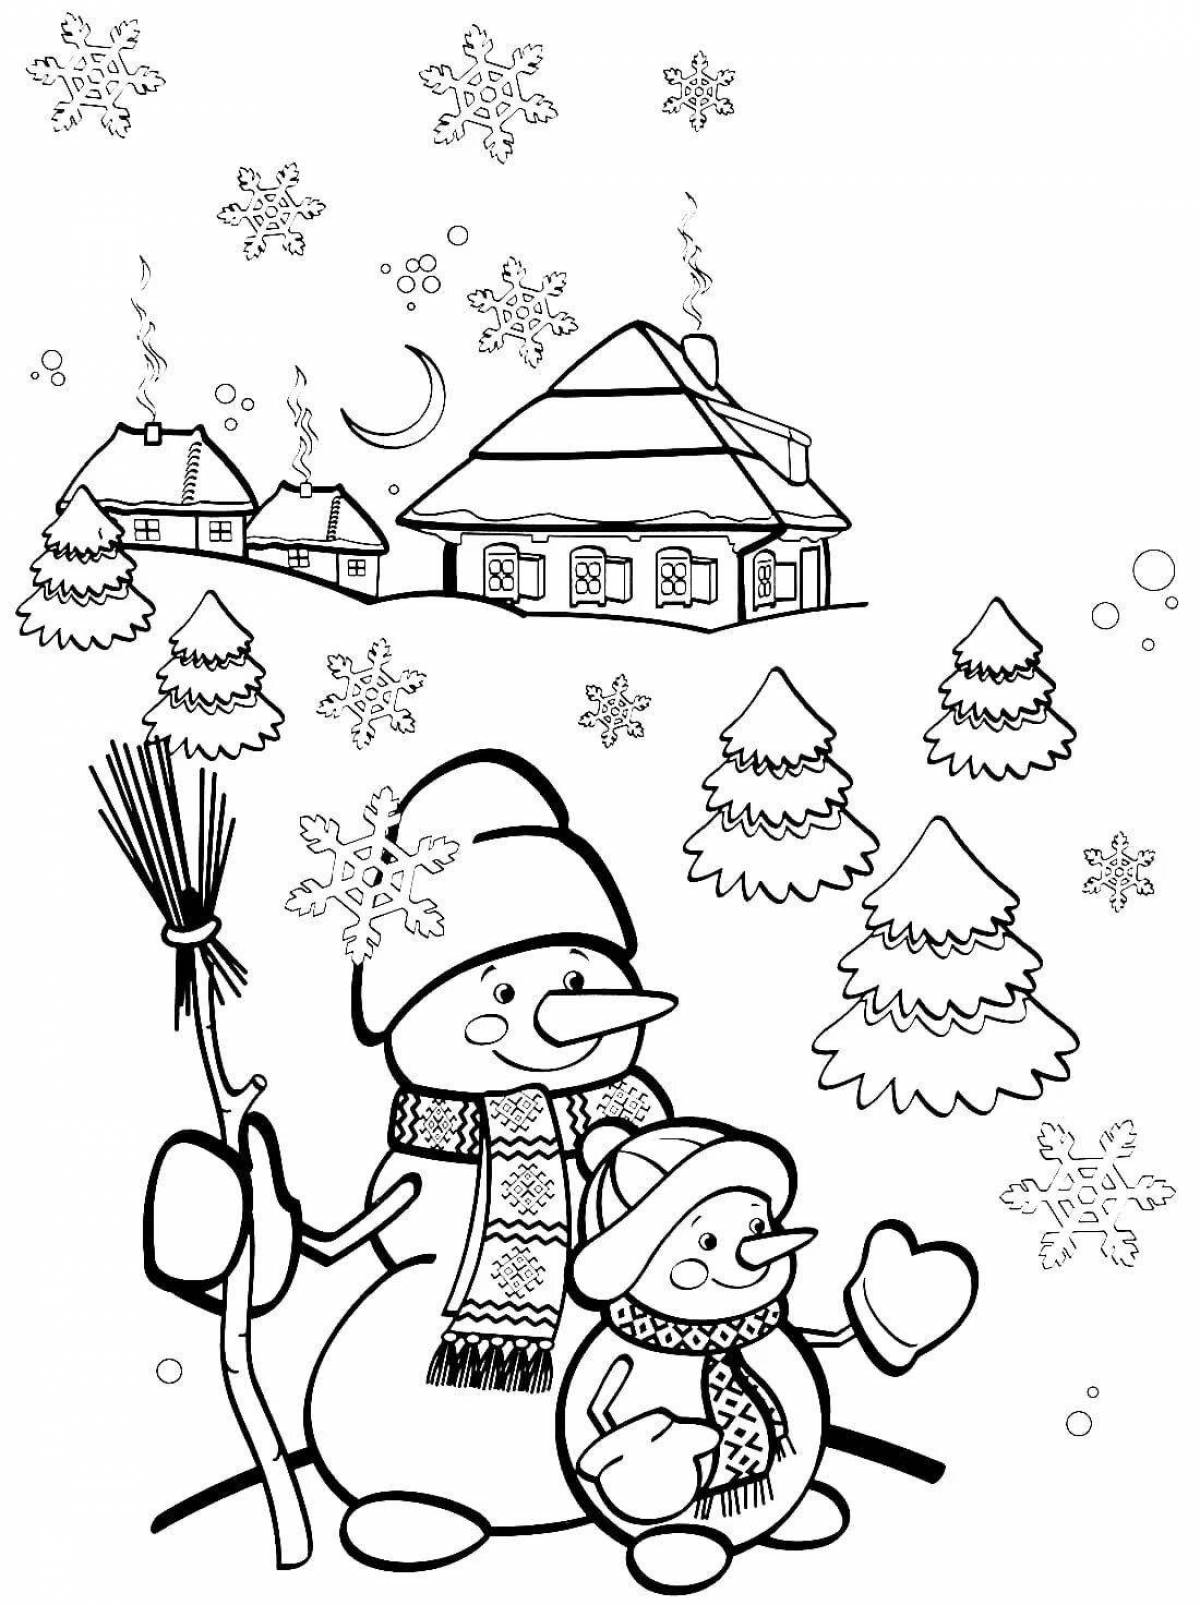 Great winter forest coloring page for 5-6 year olds